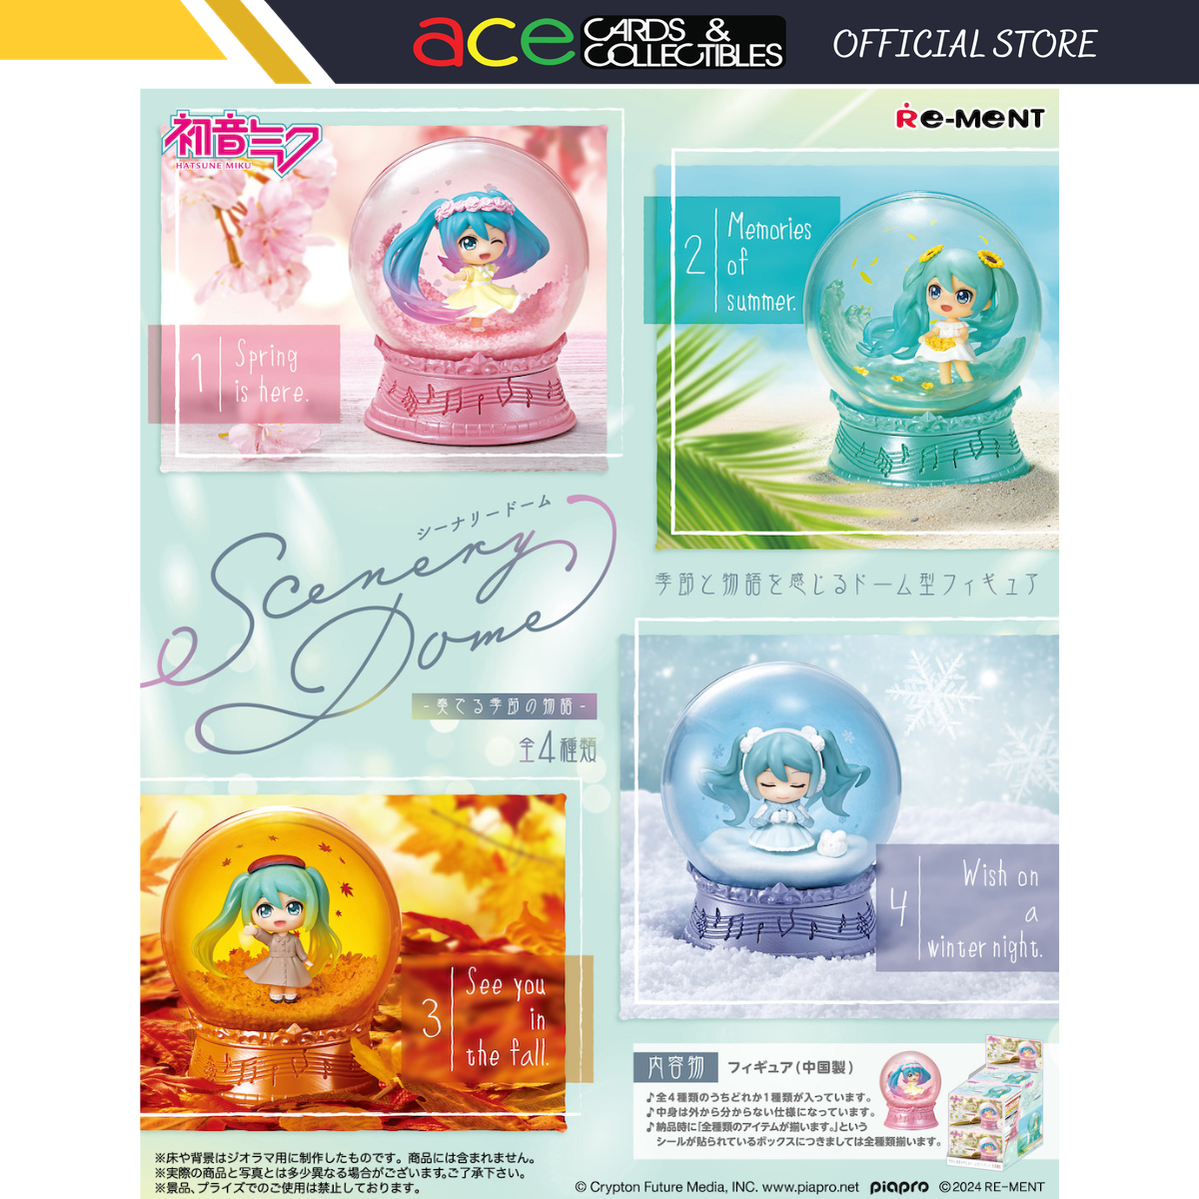 Re-Ment Hatsune Miku Scenery Dome-Single Box-Re-Ment-Ace Cards &amp; Collectibles